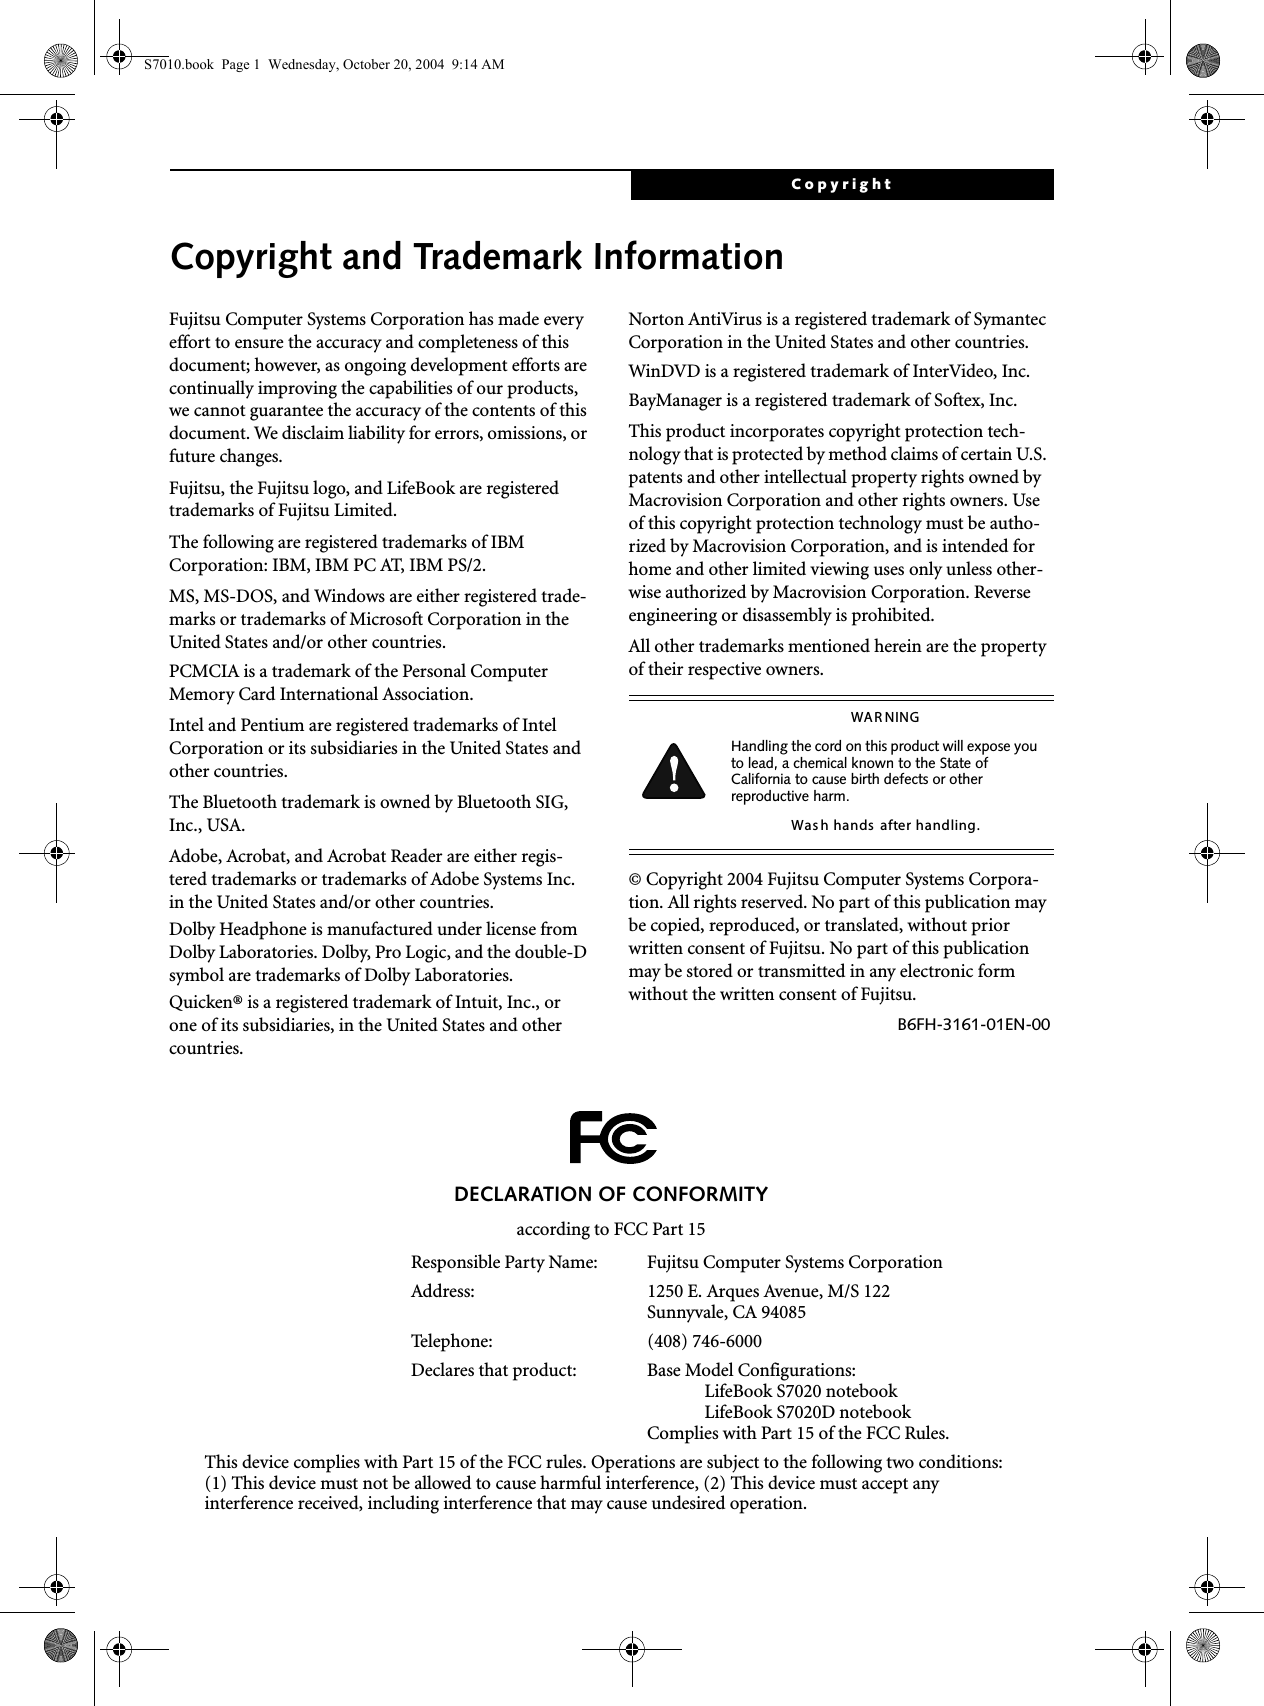 CopyrightCopyright and Trademark InformationFujitsu Computer Systems Corporation has made every effort to ensure the accuracy and completeness of this document; however, as ongoing development efforts are continually improving the capabilities of our products, we cannot guarantee the accuracy of the contents of this document. We disclaim liability for errors, omissions, or future changes.Fujitsu, the Fujitsu logo, and LifeBook are registered trademarks of Fujitsu Limited.The following are registered trademarks of IBM Corporation: IBM, IBM PC AT, IBM PS/2. MS, MS-DOS, and Windows are either registered trade-marks or trademarks of Microsoft Corporation in the United States and/or other countries.PCMCIA is a trademark of the Personal Computer Memory Card International Association.Intel and Pentium are registered trademarks of Intel Corporation or its subsidiaries in the United States and other countries.The Bluetooth trademark is owned by Bluetooth SIG, Inc., USA.Adobe, Acrobat, and Acrobat Reader are either regis-tered trademarks or trademarks of Adobe Systems Inc. in the United States and/or other countries.Dolby Headphone is manufactured under license from Dolby Laboratories. Dolby, Pro Logic, and the double-D symbol are trademarks of Dolby Laboratories.Quicken® is a registered trademark of Intuit, Inc., or one of its subsidiaries, in the United States and other countries.Norton AntiVirus is a registered trademark of Symantec Corporation in the United States and other countries.WinDVD is a registered trademark of InterVideo, Inc.BayManager is a registered trademark of Softex, Inc.This product incorporates copyright protection tech-nology that is protected by method claims of certain U.S. patents and other intellectual property rights owned by Macrovision Corporation and other rights owners. Use of this copyright protection technology must be autho-rized by Macrovision Corporation, and is intended for home and other limited viewing uses only unless other-wise authorized by Macrovision Corporation. Reverse engineering or disassembly is prohibited.All other trademarks mentioned herein are the property of their respective owners.© Copyright 2004 Fujitsu Computer Systems Corpora-tion. All rights reserved. No part of this publication may be copied, reproduced, or translated, without prior written consent of Fujitsu. No part of this publication may be stored or transmitted in any electronic form without the written consent of Fujitsu.B6FH-3161-01EN-00WAR NINGHandling the cord on this product will expose you to lead, a chemical known to the State of California to cause birth defects or other reproductive harm. Was h hands  after handling.DECLARATION OF CONFORMITYaccording to FCC Part 15Responsible Party Name: Fujitsu Computer Systems CorporationAddress:  1250 E. Arques Avenue, M/S 122Sunnyvale, CA 94085Telephone: (408) 746-6000Declares that product: Base Model Configurations:LifeBook S7020 notebookLifeBook S7020D notebookComplies with Part 15 of the FCC Rules.This device complies with Part 15 of the FCC rules. Operations are subject to the following two conditions:(1) This device must not be allowed to cause harmful interference, (2) This device must accept anyinterference received, including interference that may cause undesired operation.S7010.book  Page 1  Wednesday, October 20, 2004  9:14 AM